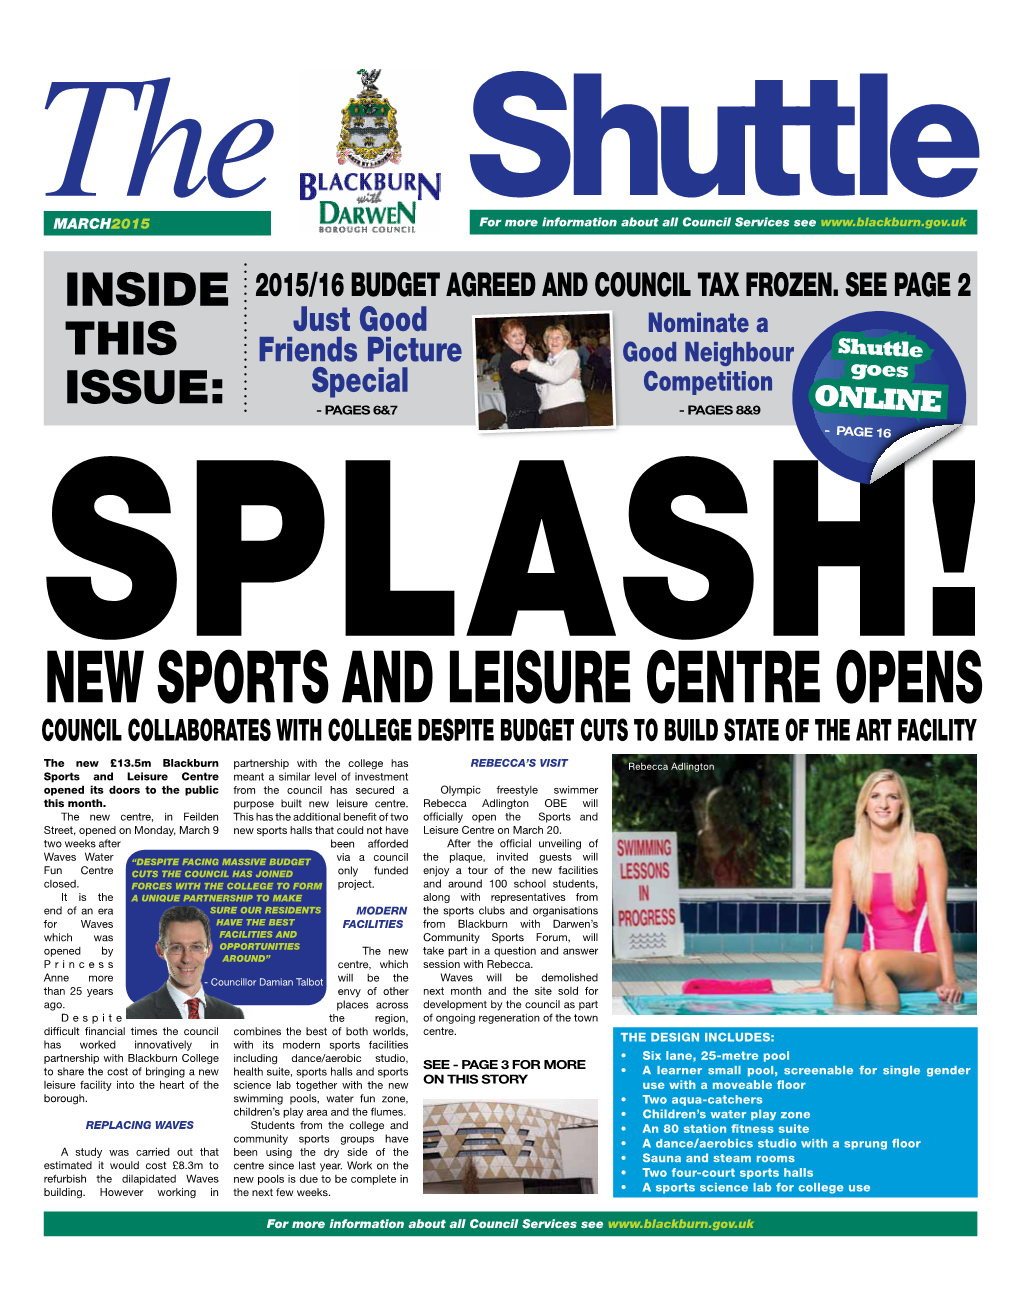 New Sports and Leisure Centre Opens Council COLLABORATES with College Despite Budget Cuts to Build State of the Art Facility